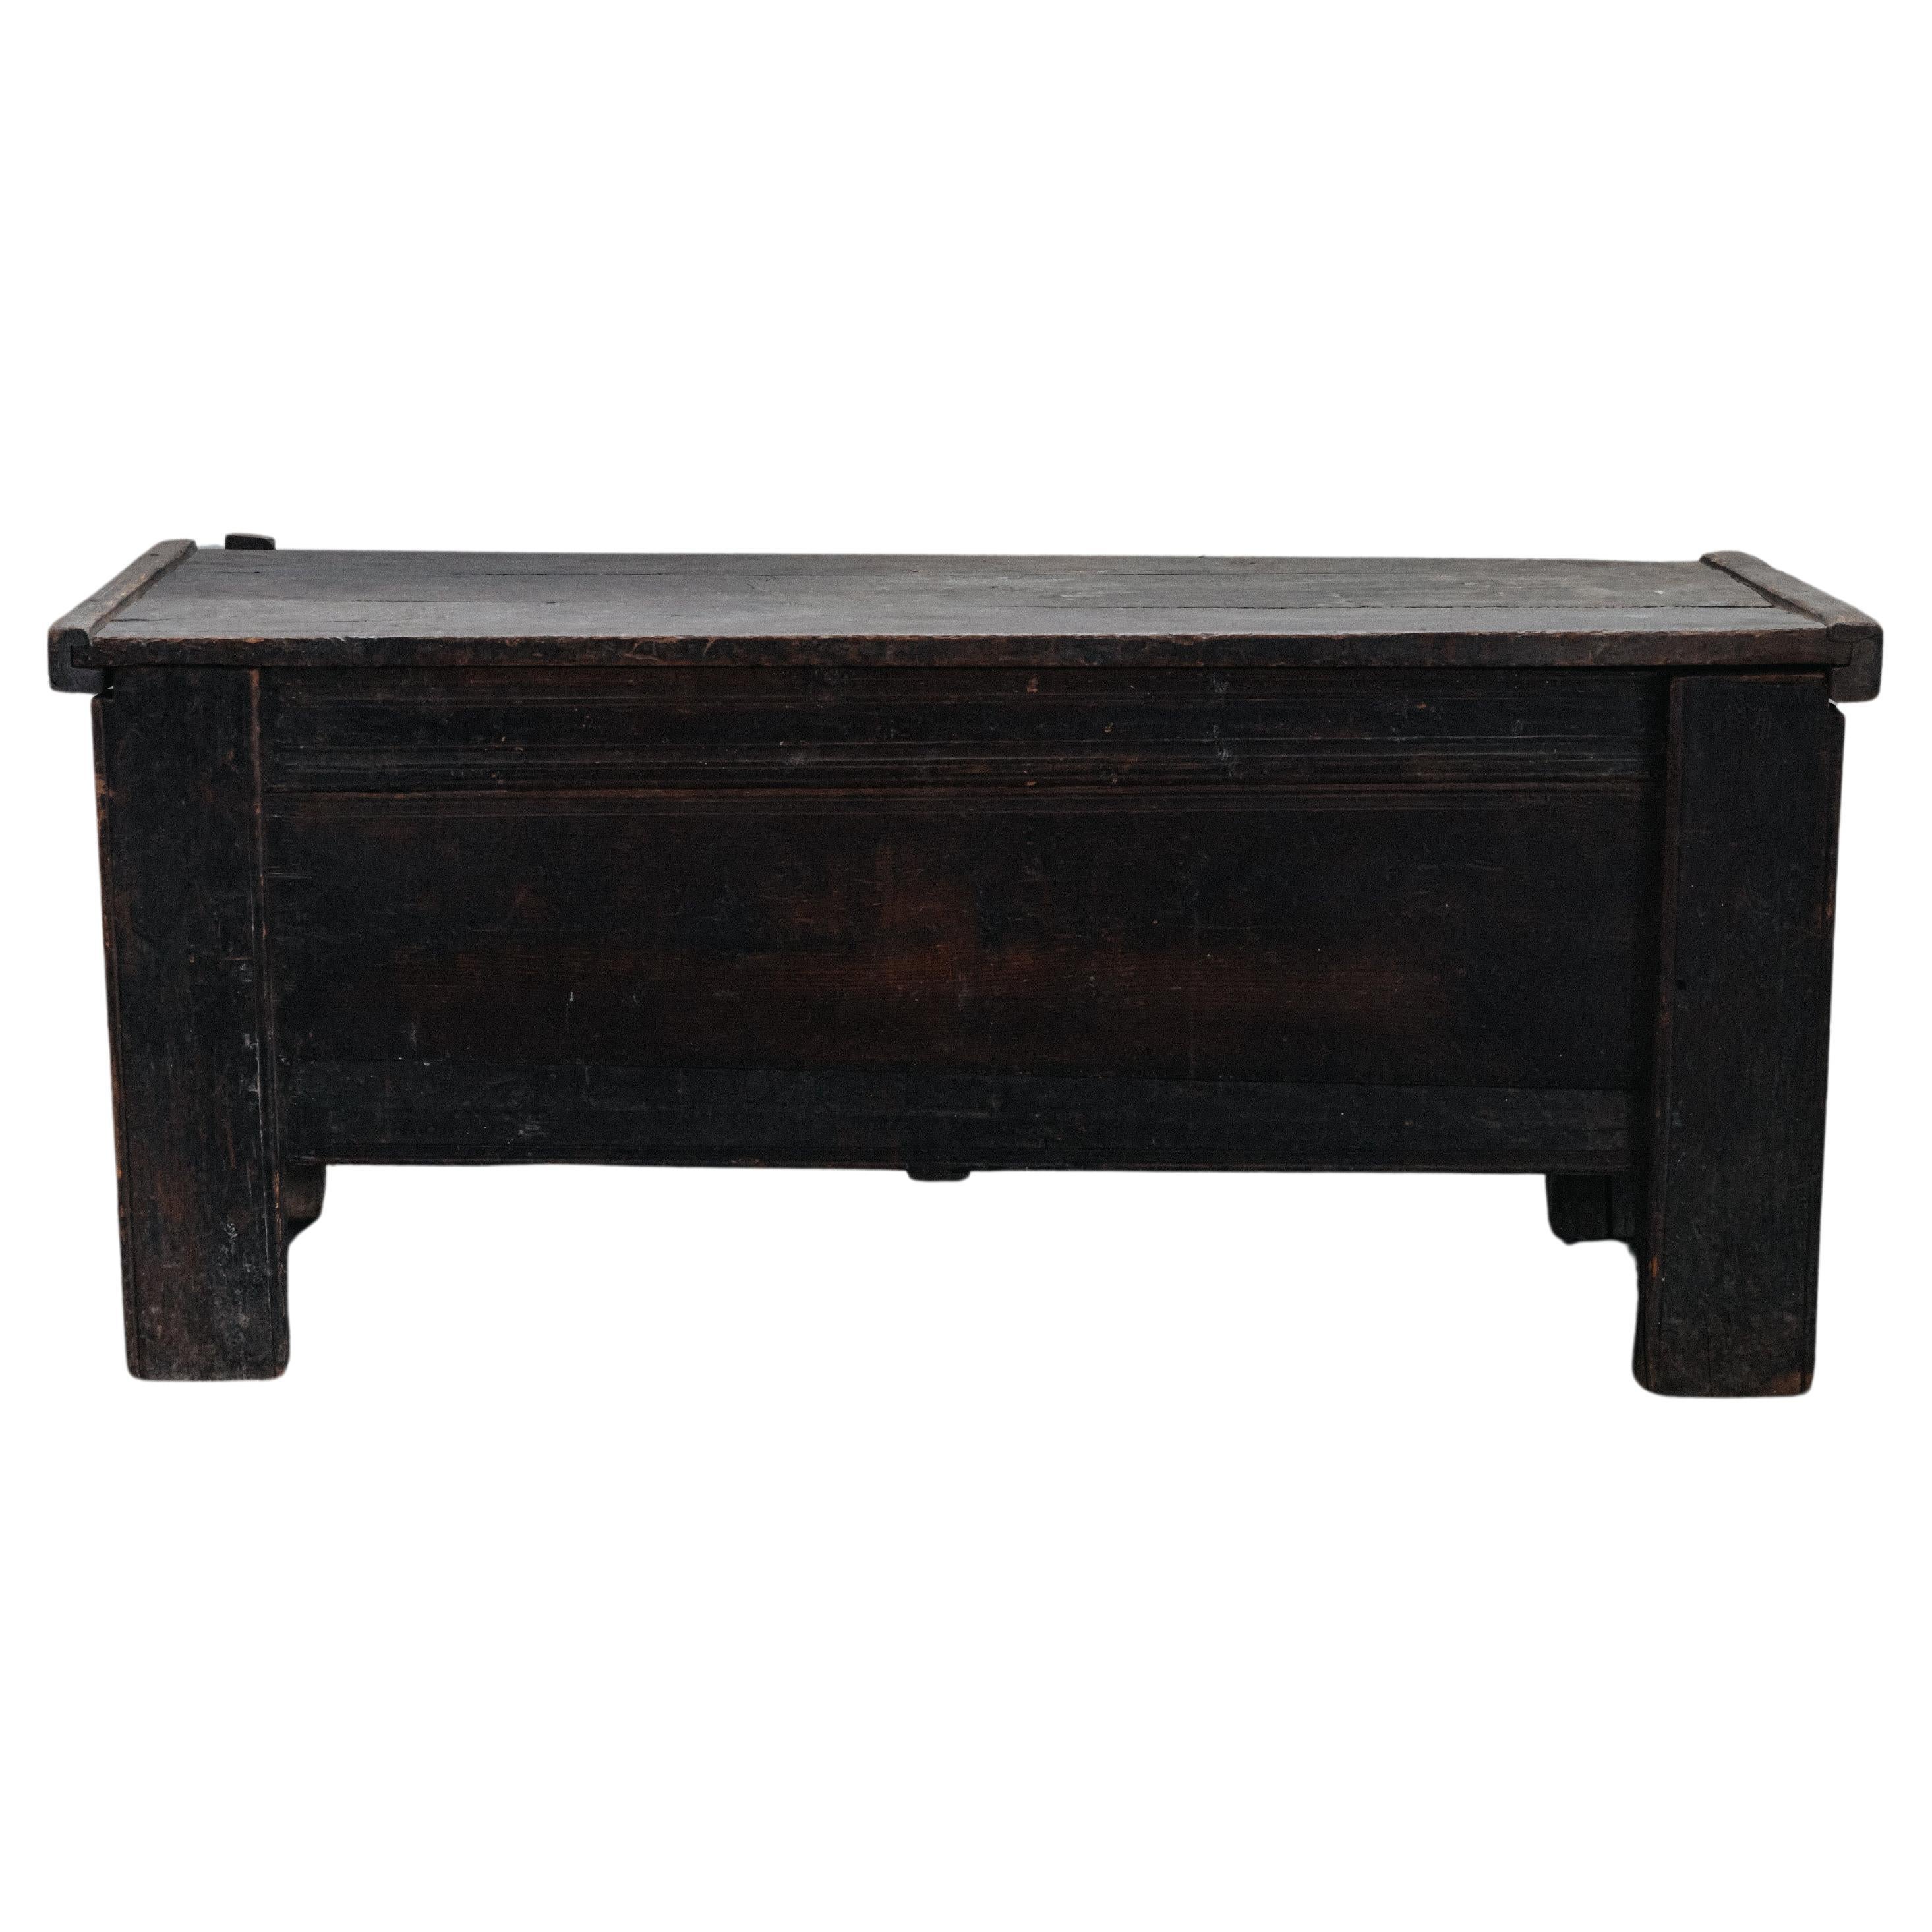 Early Pine Trunk Console Table From Italy, Circa 1750 For Sale